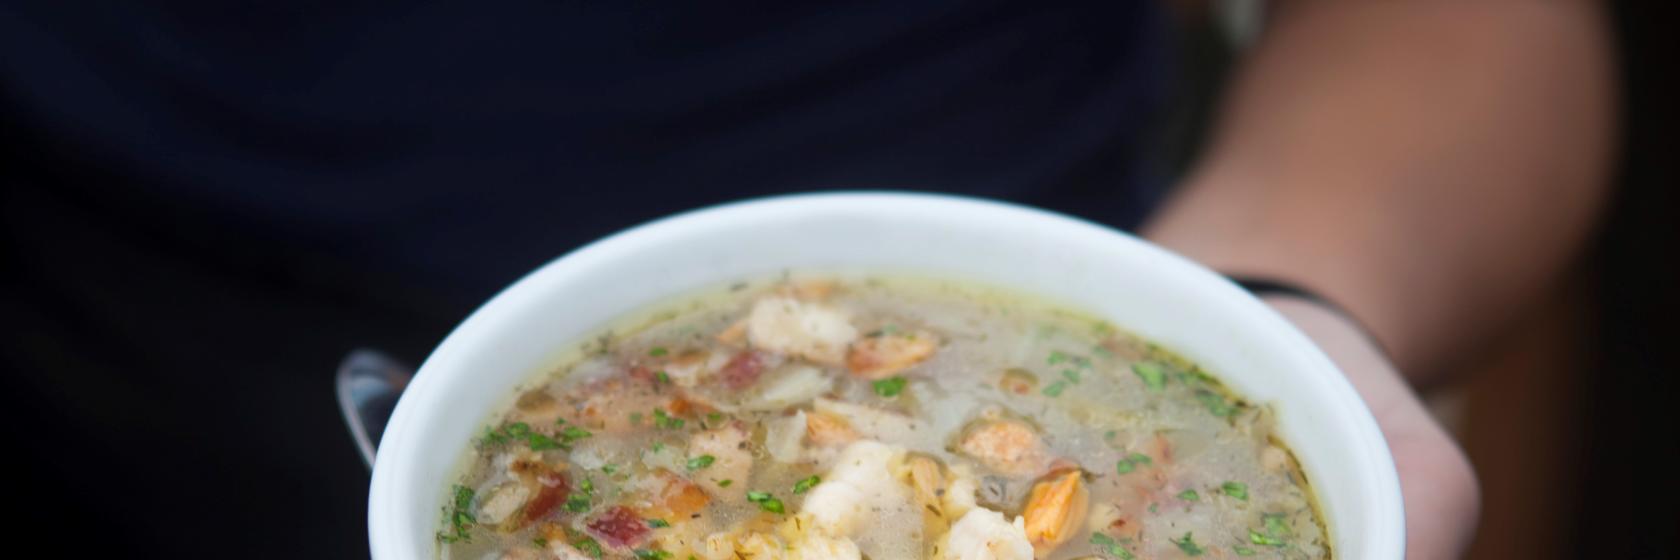 Where can you find the best clam chowder in Rhode Island? - Quora